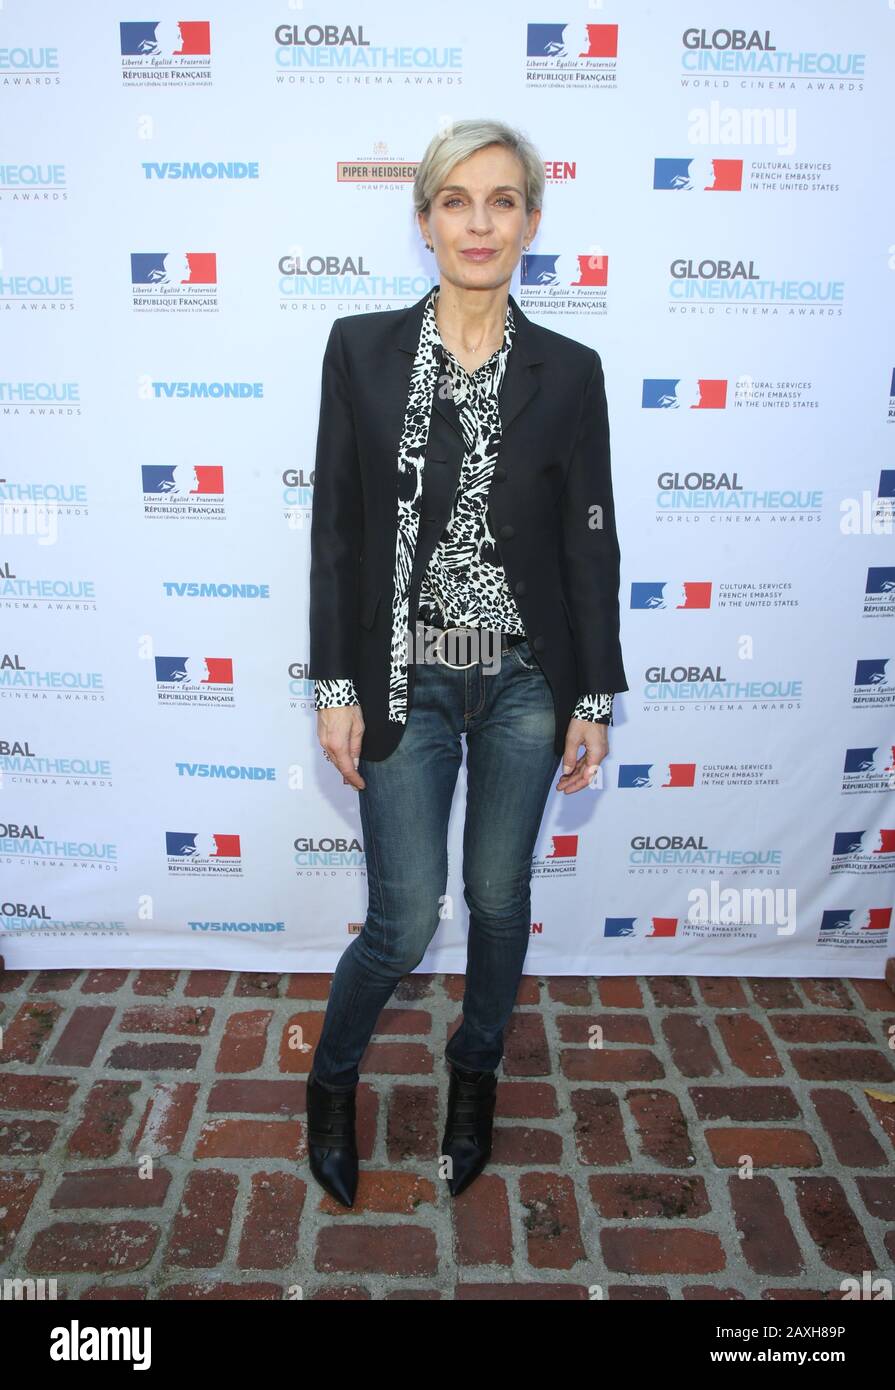 Beverly Hills, Ca. 10th Feb, 2020. Mélita Toscan du Plantier, at Global CINEMATHEQUE presents the World Cinema Awards ceremony at the Residence du Consul de France in Beverly Hills California on February 10, 2020. Credit: Faye Sadou/Media Punch/Alamy Live News Stock Photo